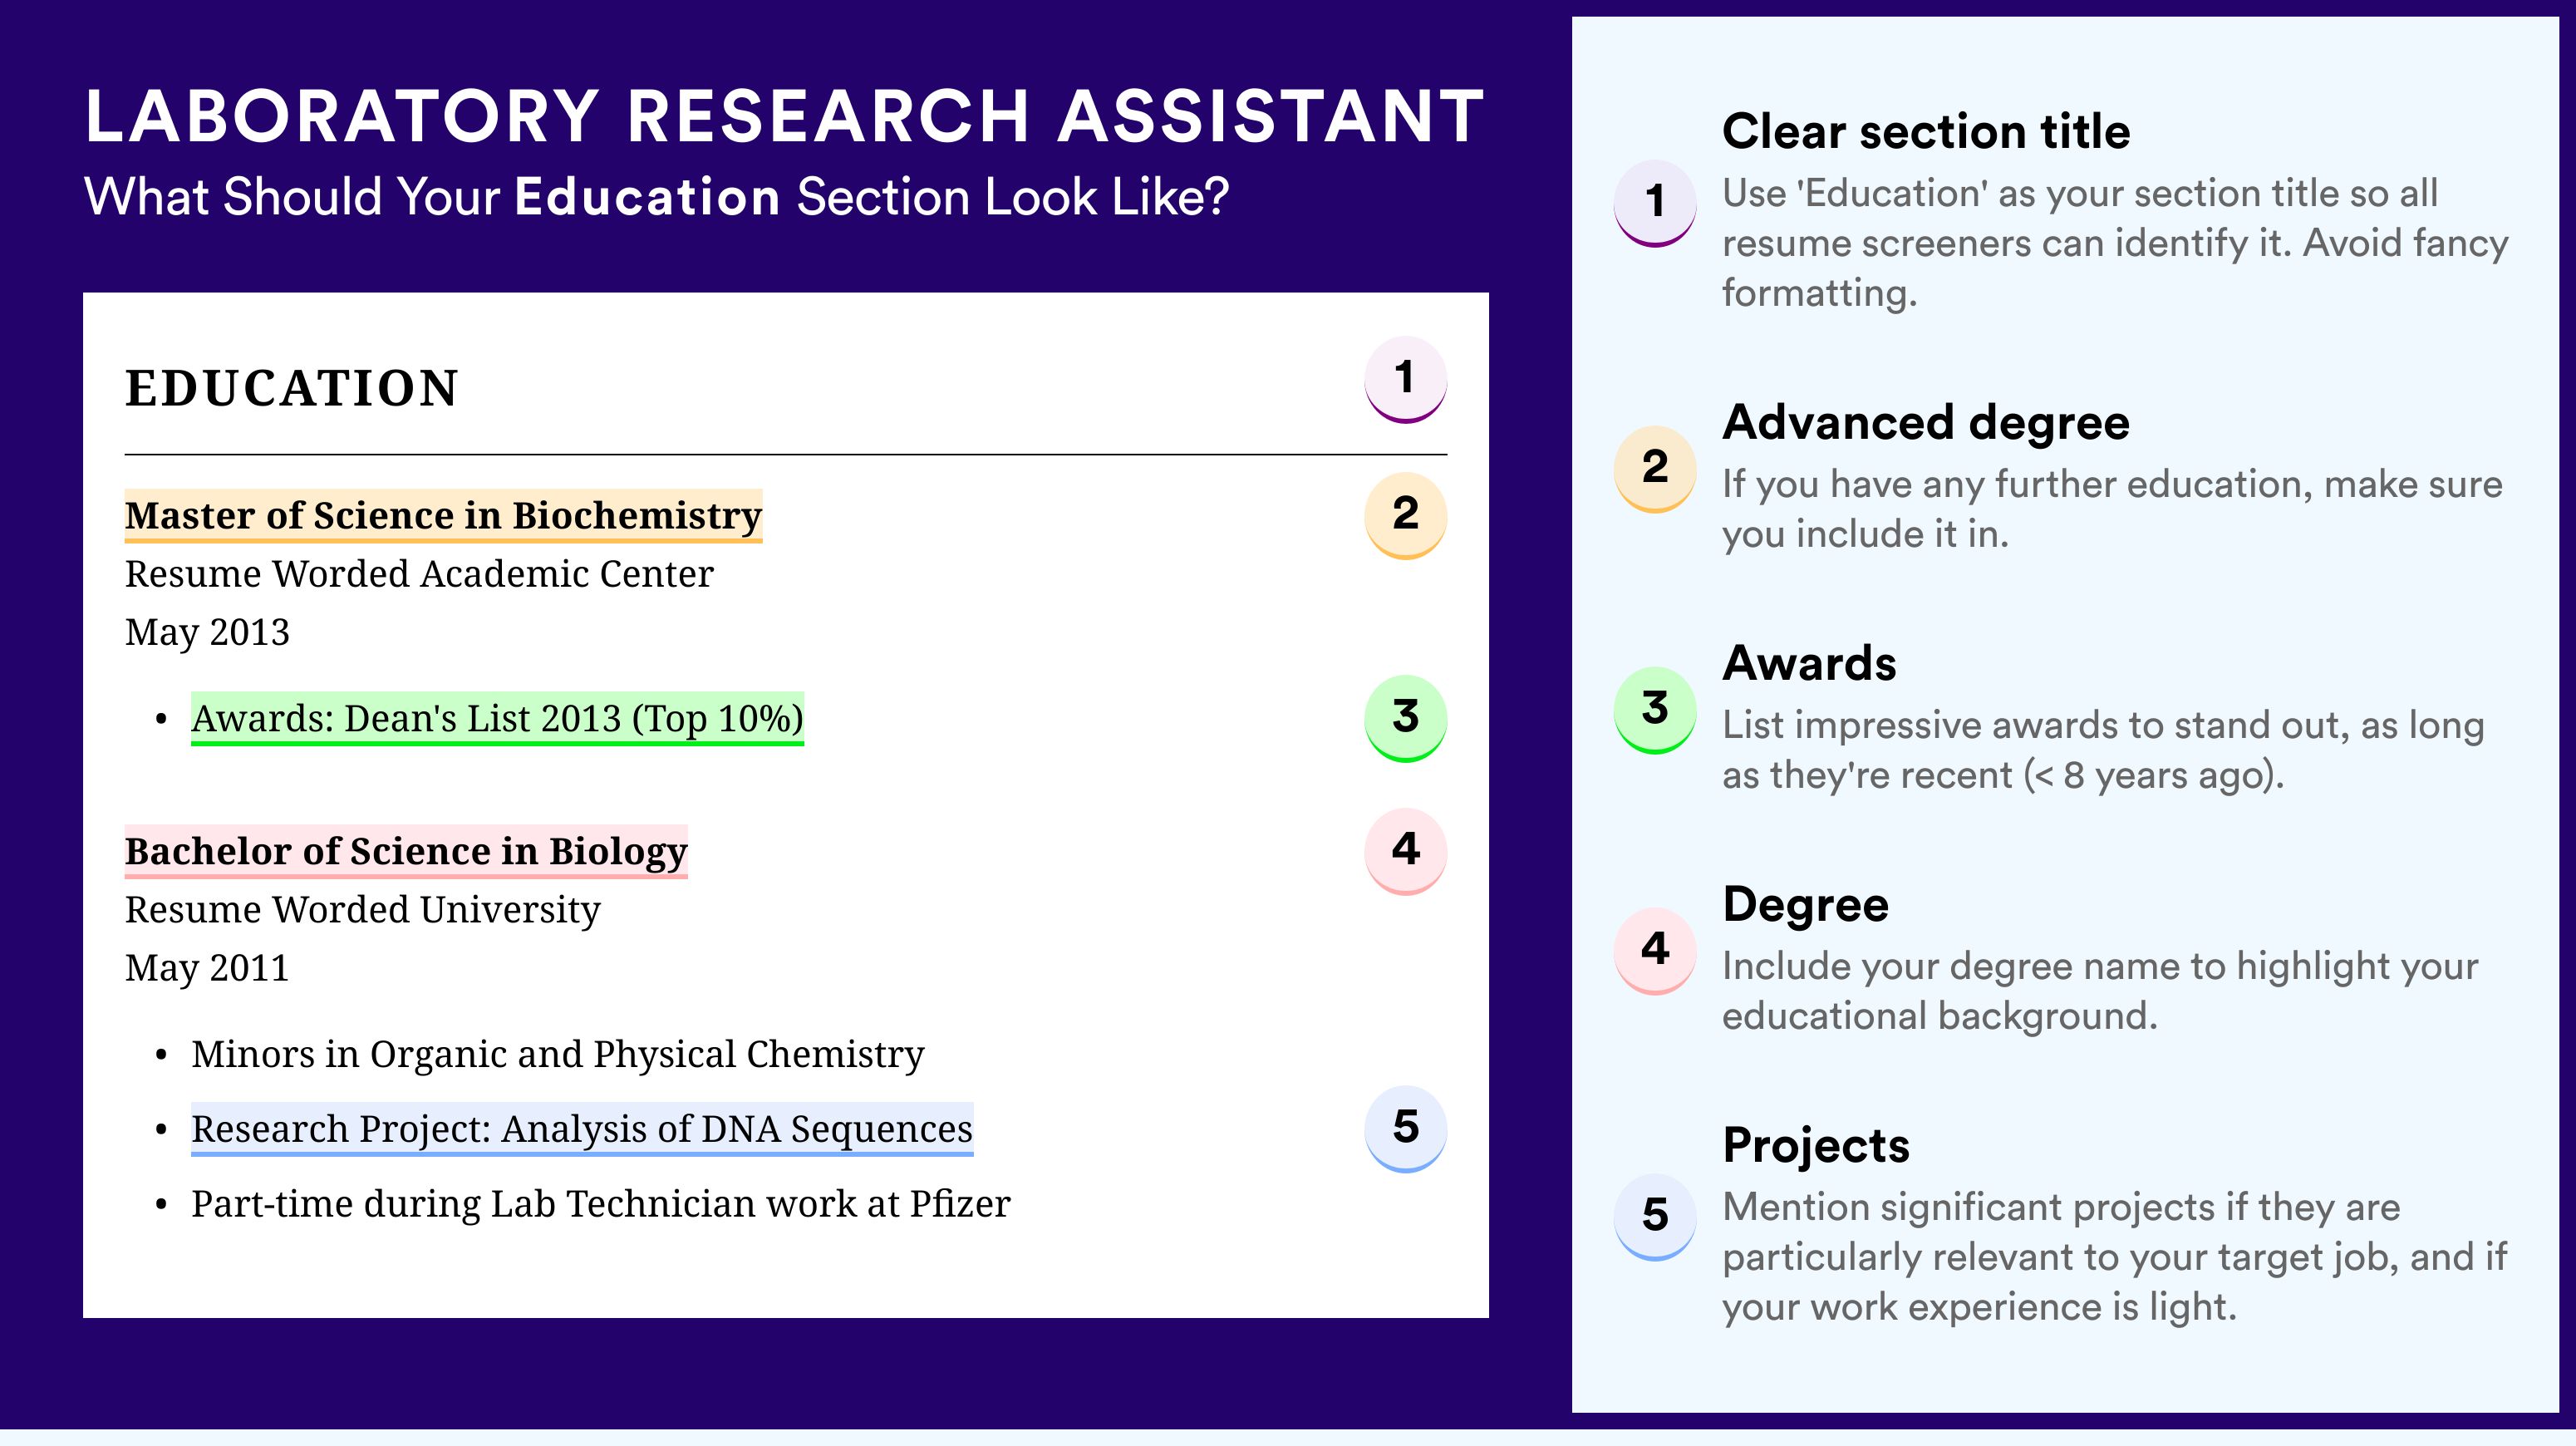 How To Write An Education Section - Laboratory Research Assistant Roles